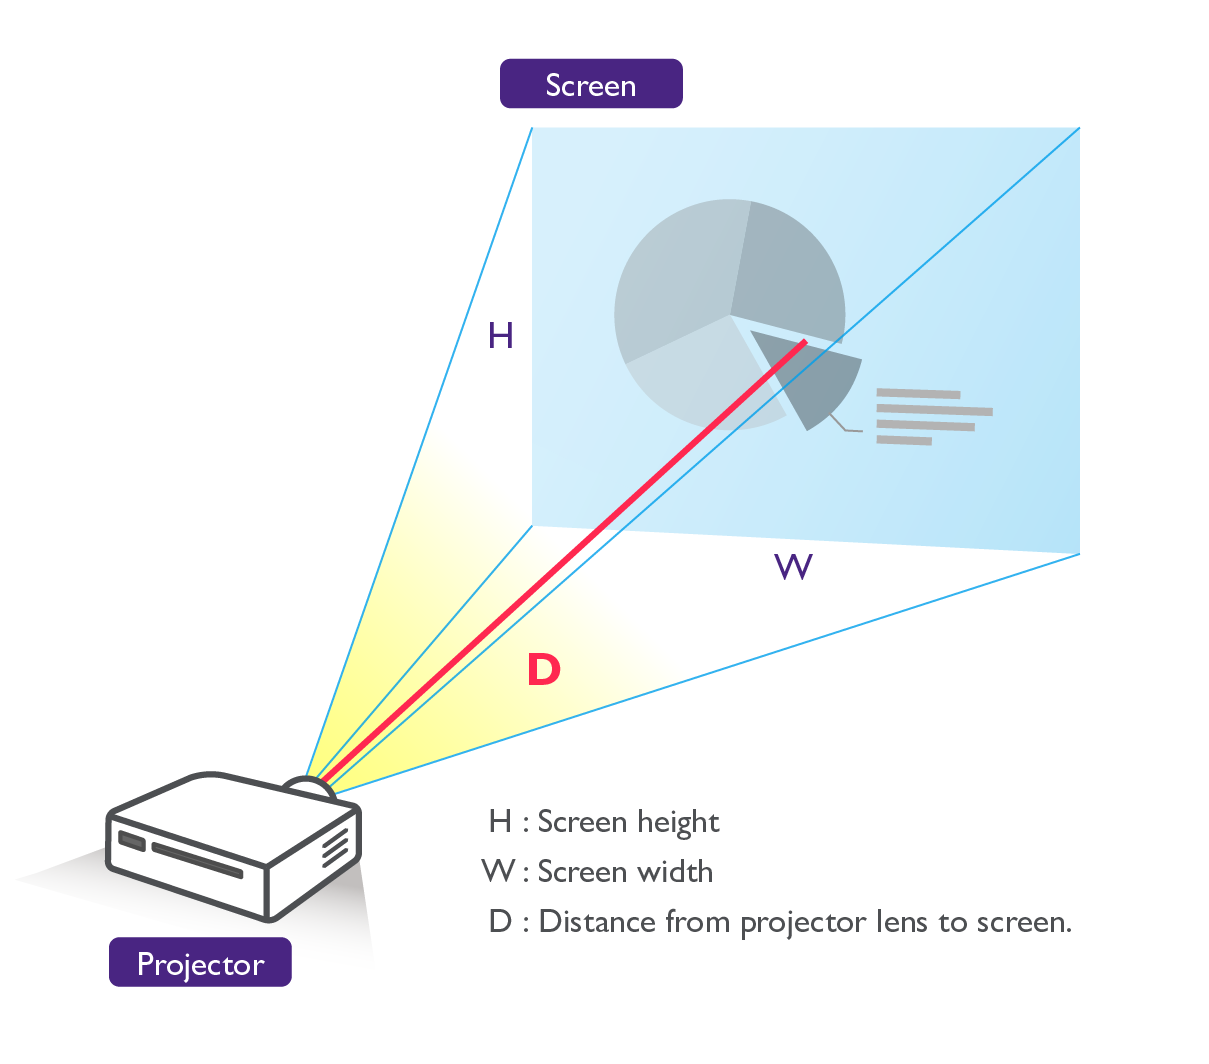 Throw ratio is the distance from the projector lens to the screen divided by the screen width.